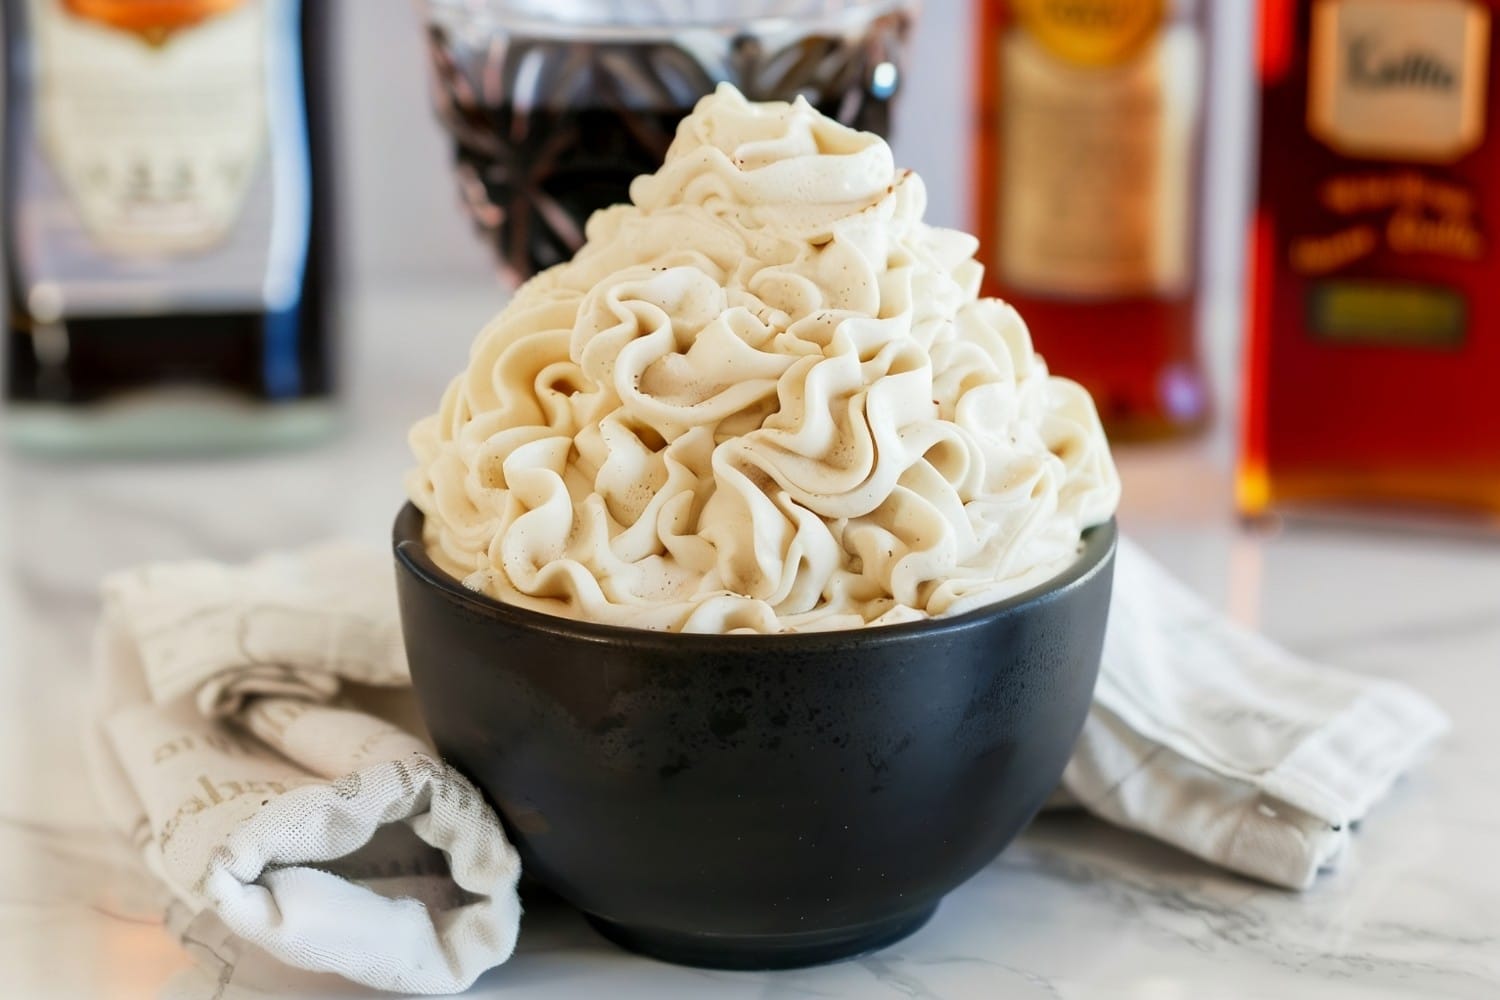 Creamy whipped cream infused with the rich and aromatic flavor of Kahlua